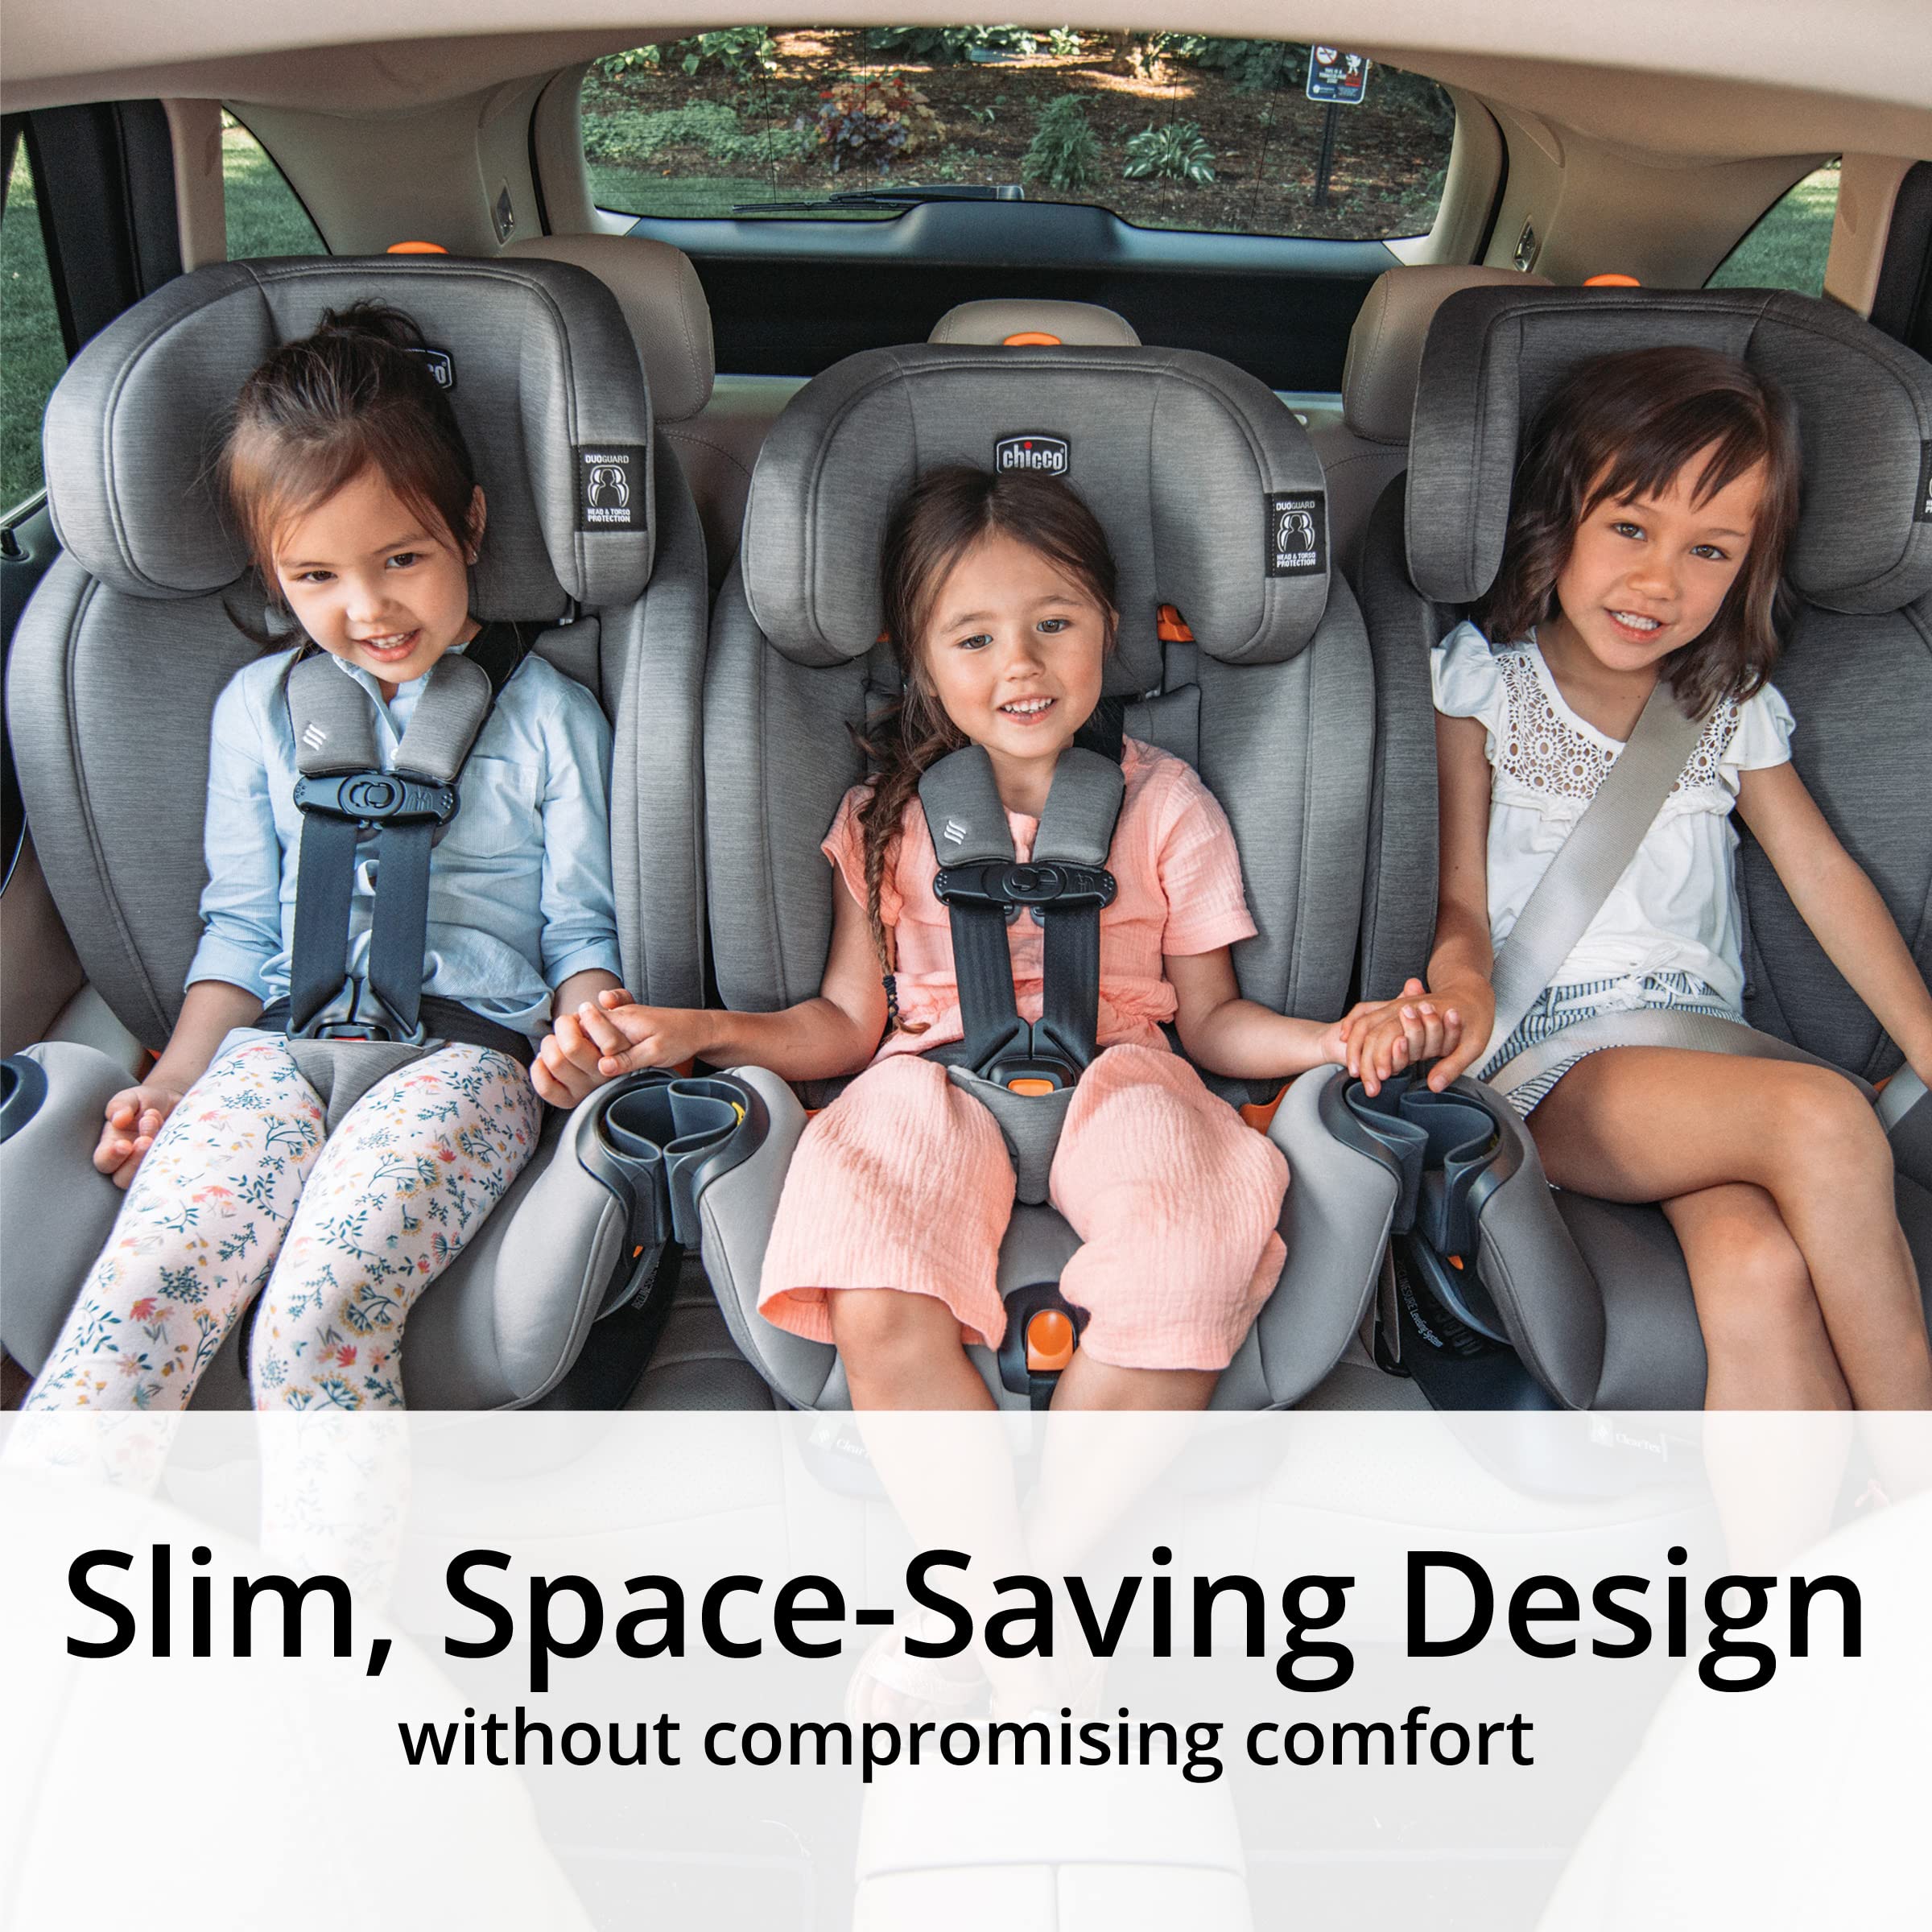 Chicco OneFit ClearTex Slim All-in-One Car Seat, Rear-Facing Seat for Infants 5-40 lbs., Forward-Facing Car Seat 25-65 lbs., Booster 40-100 lbs., Convertible Car Seat | Drift/Grey